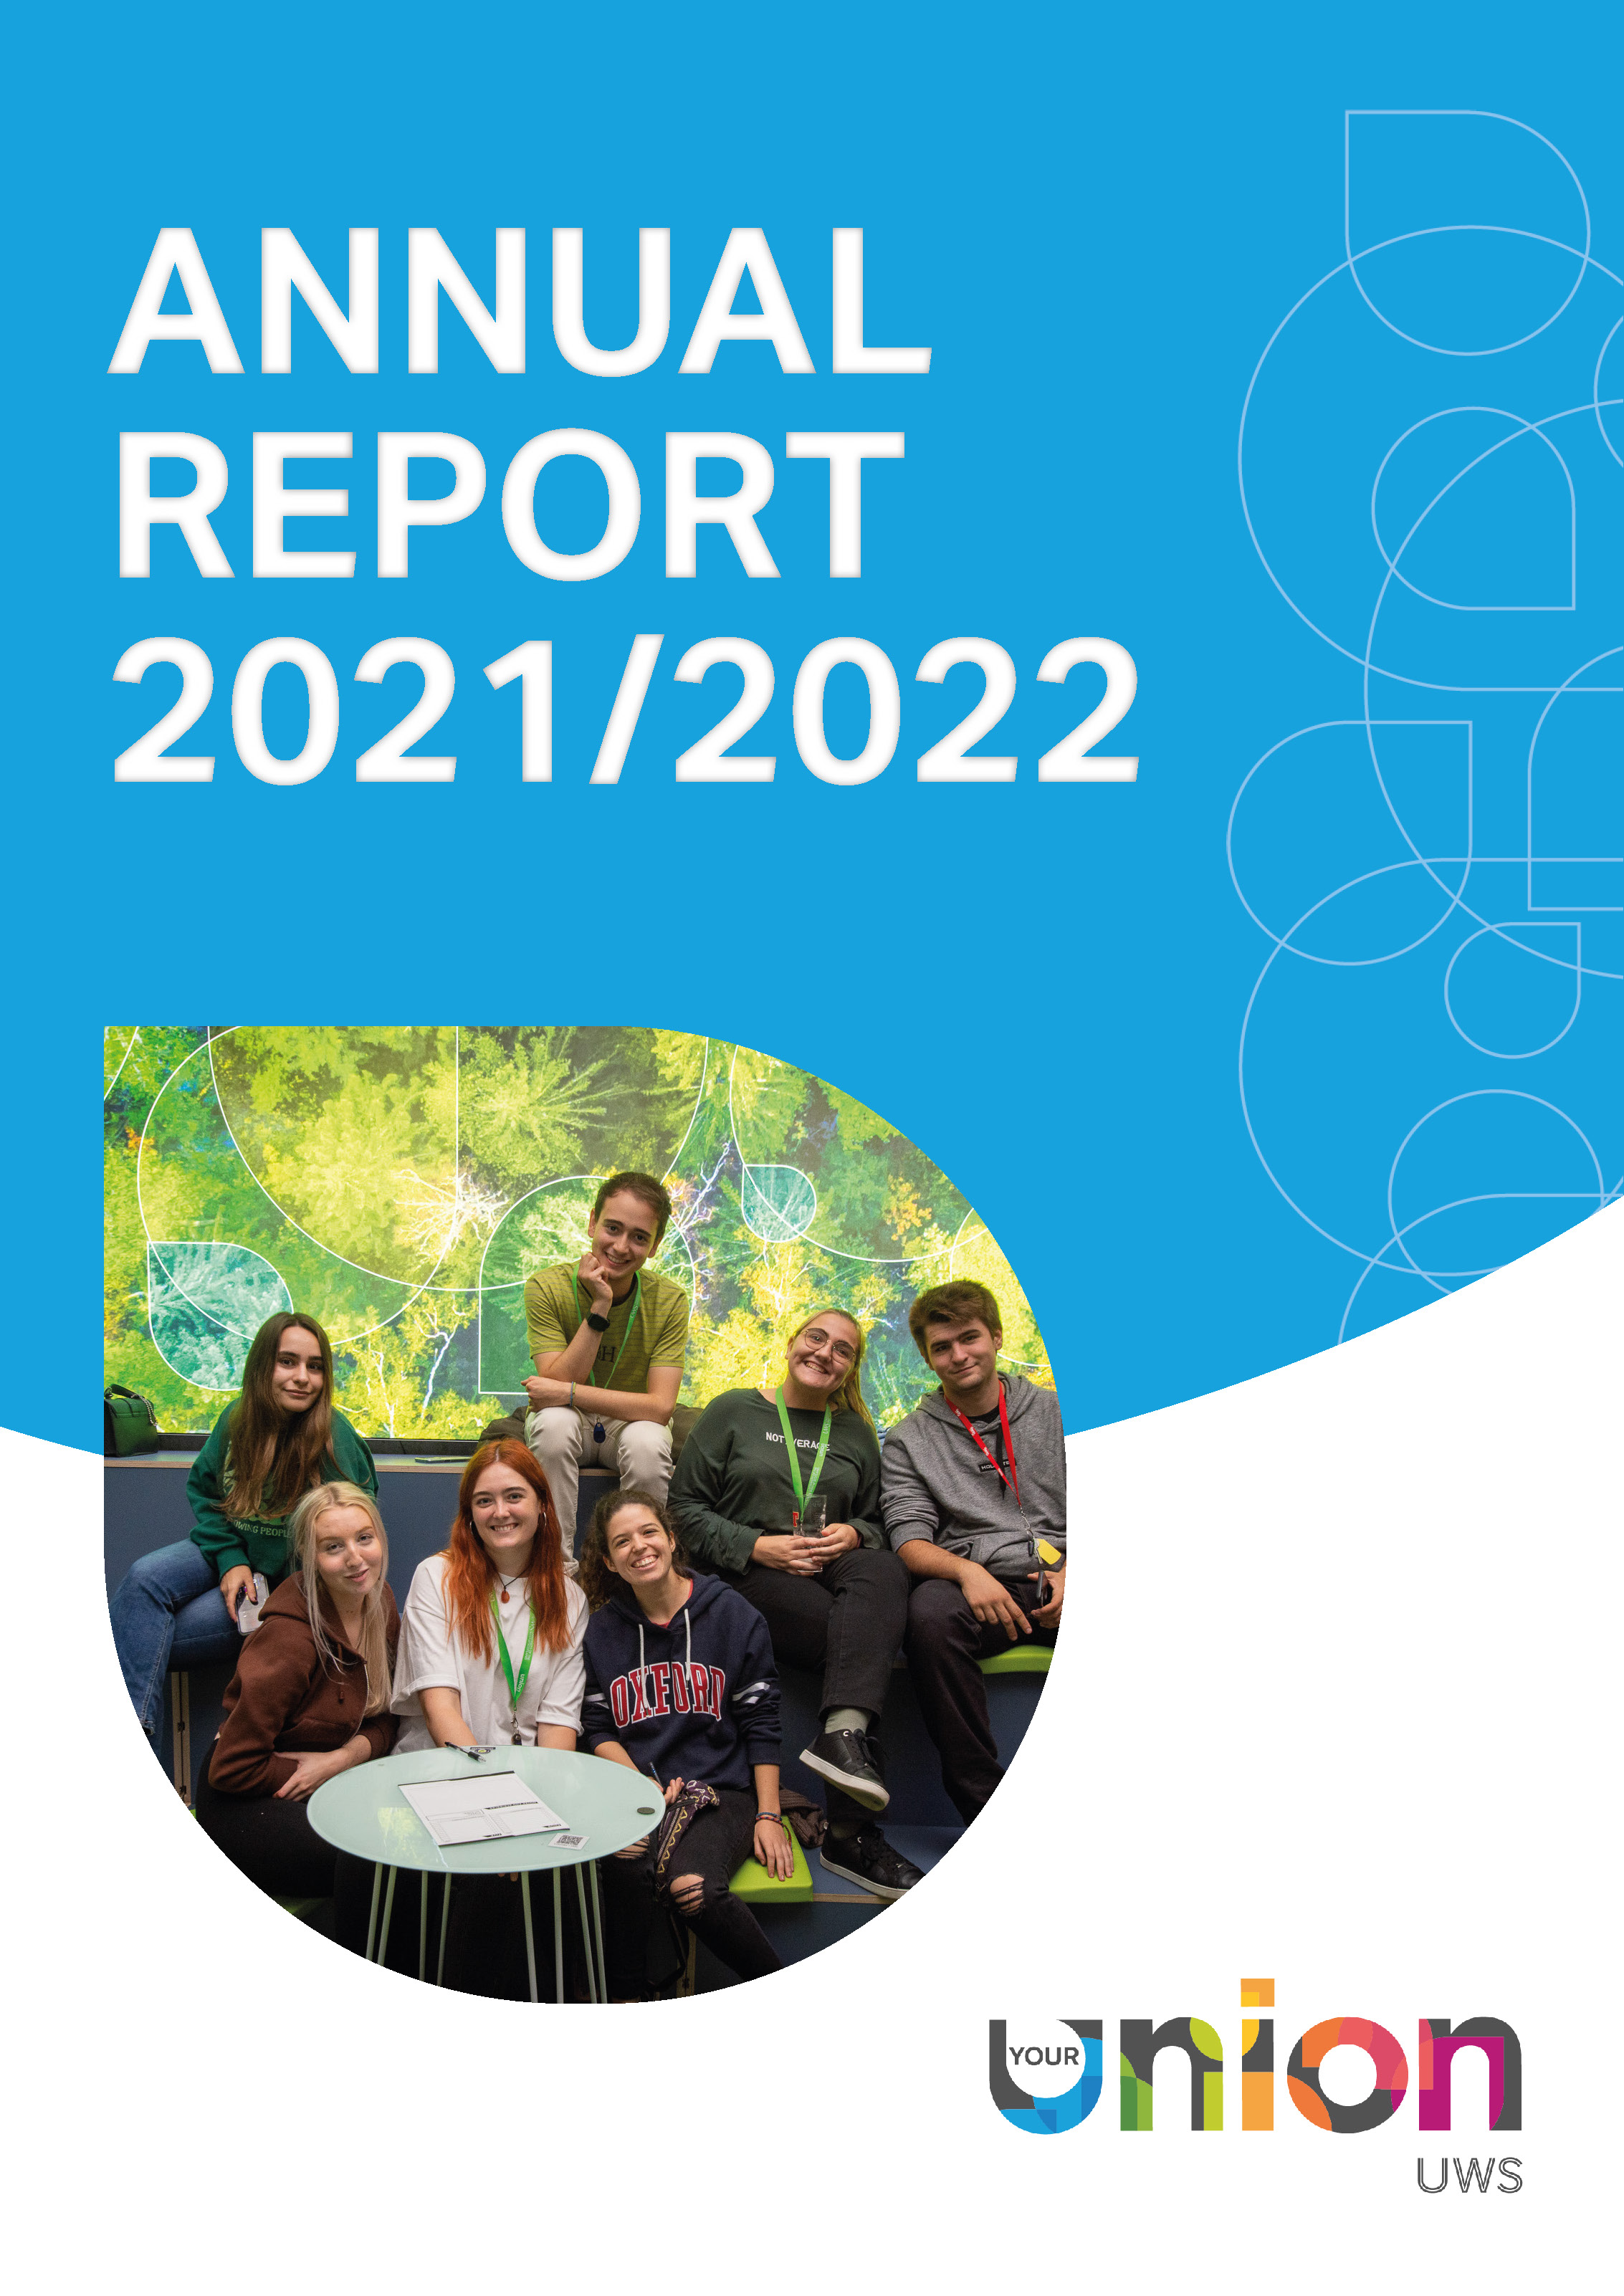 Cover page of the Annual Report 2021/2022